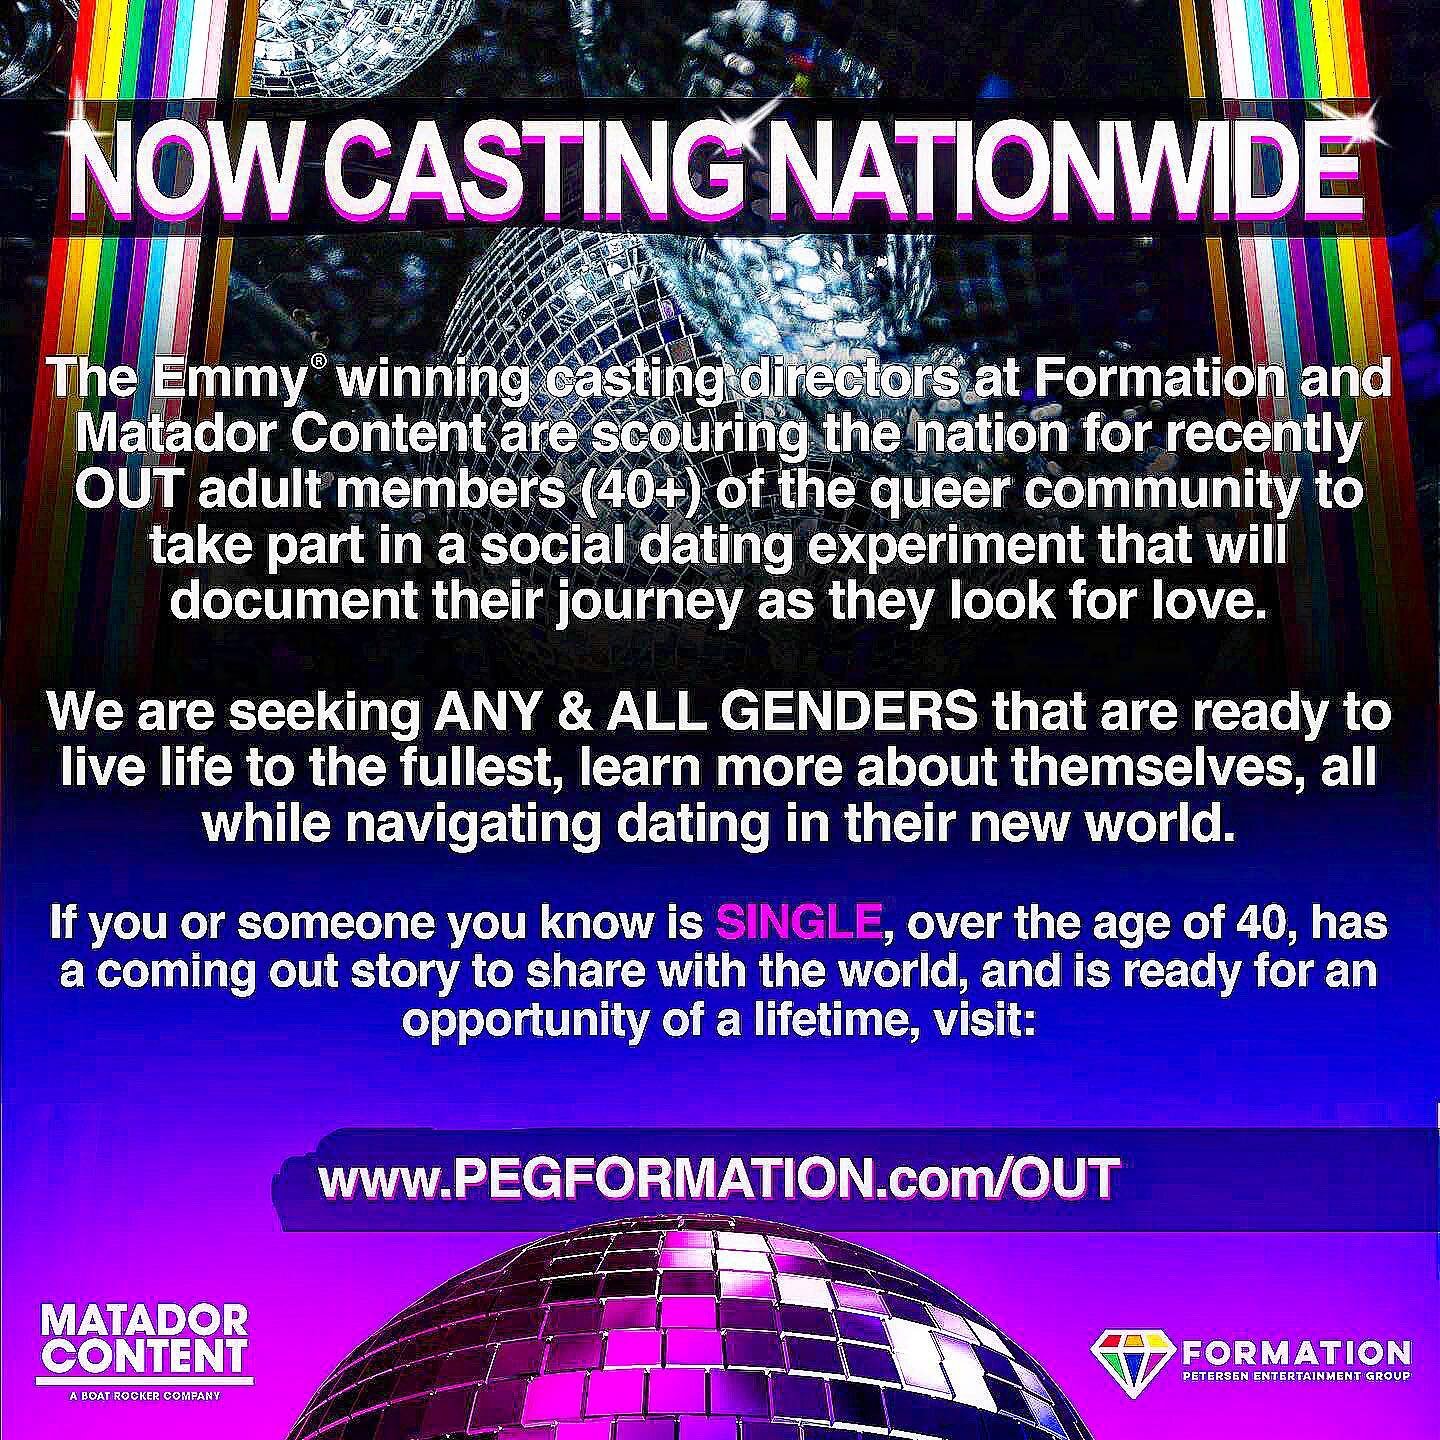 🏳️&zwj;🌈💎🏳️&zwj;⚧️💎🇺🇸
🚨 NEW CASTING 🚨 

NATIONWIDE CASTING FOR THE QUEER COMMUNITY (40+)

👇🪩👇🕺👇💃👇
www. PEGFormation.com/out

#Formation #PetersenEntertainmentGroup